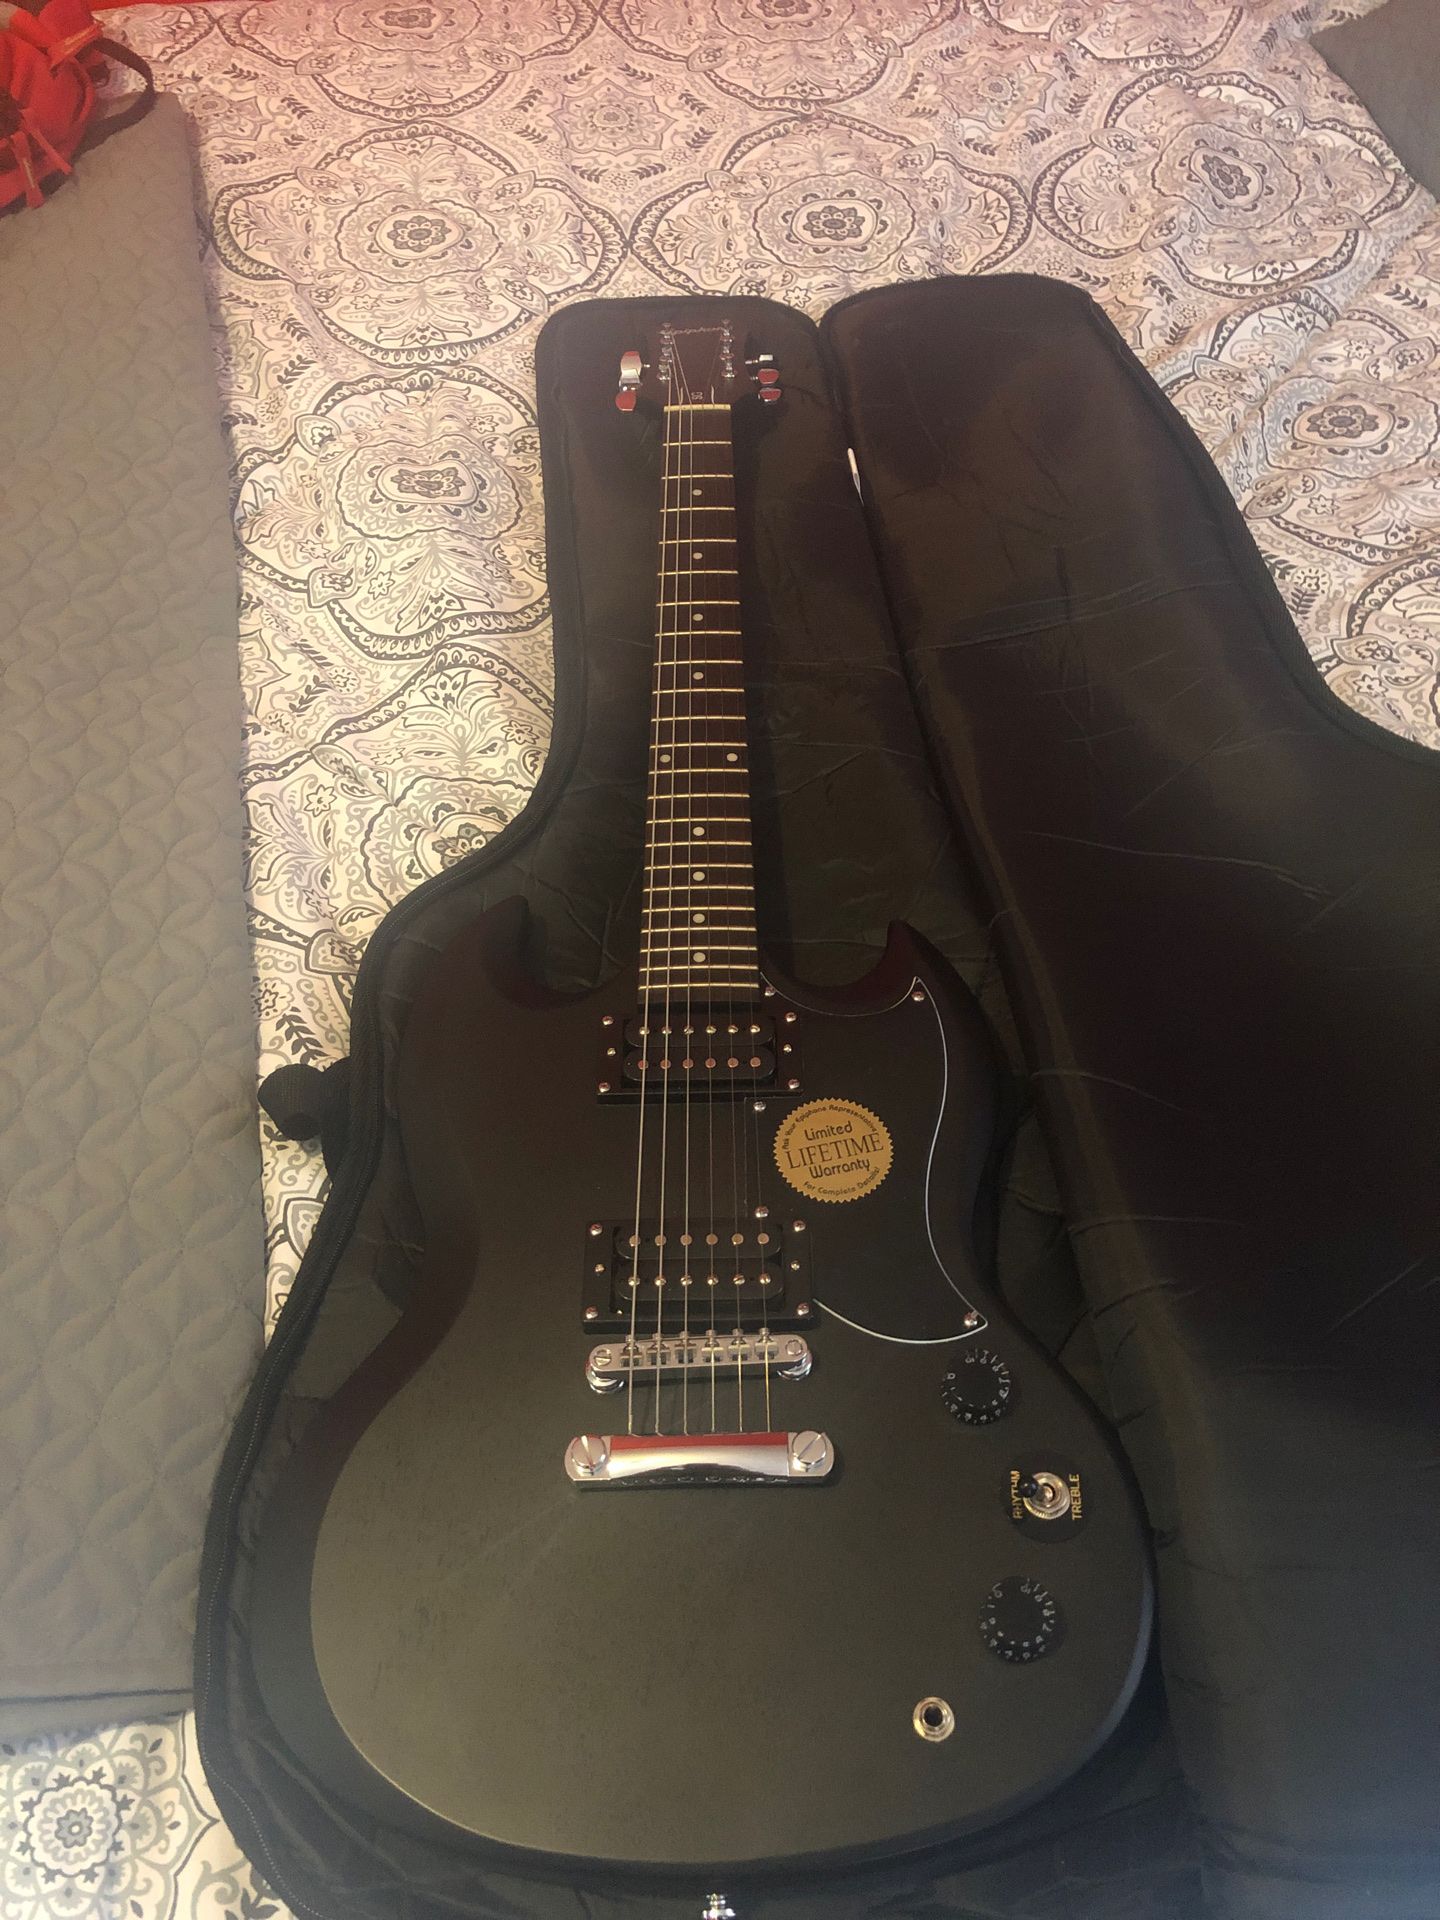 Epiphone Les Paul Electric Guitar (With Extras)